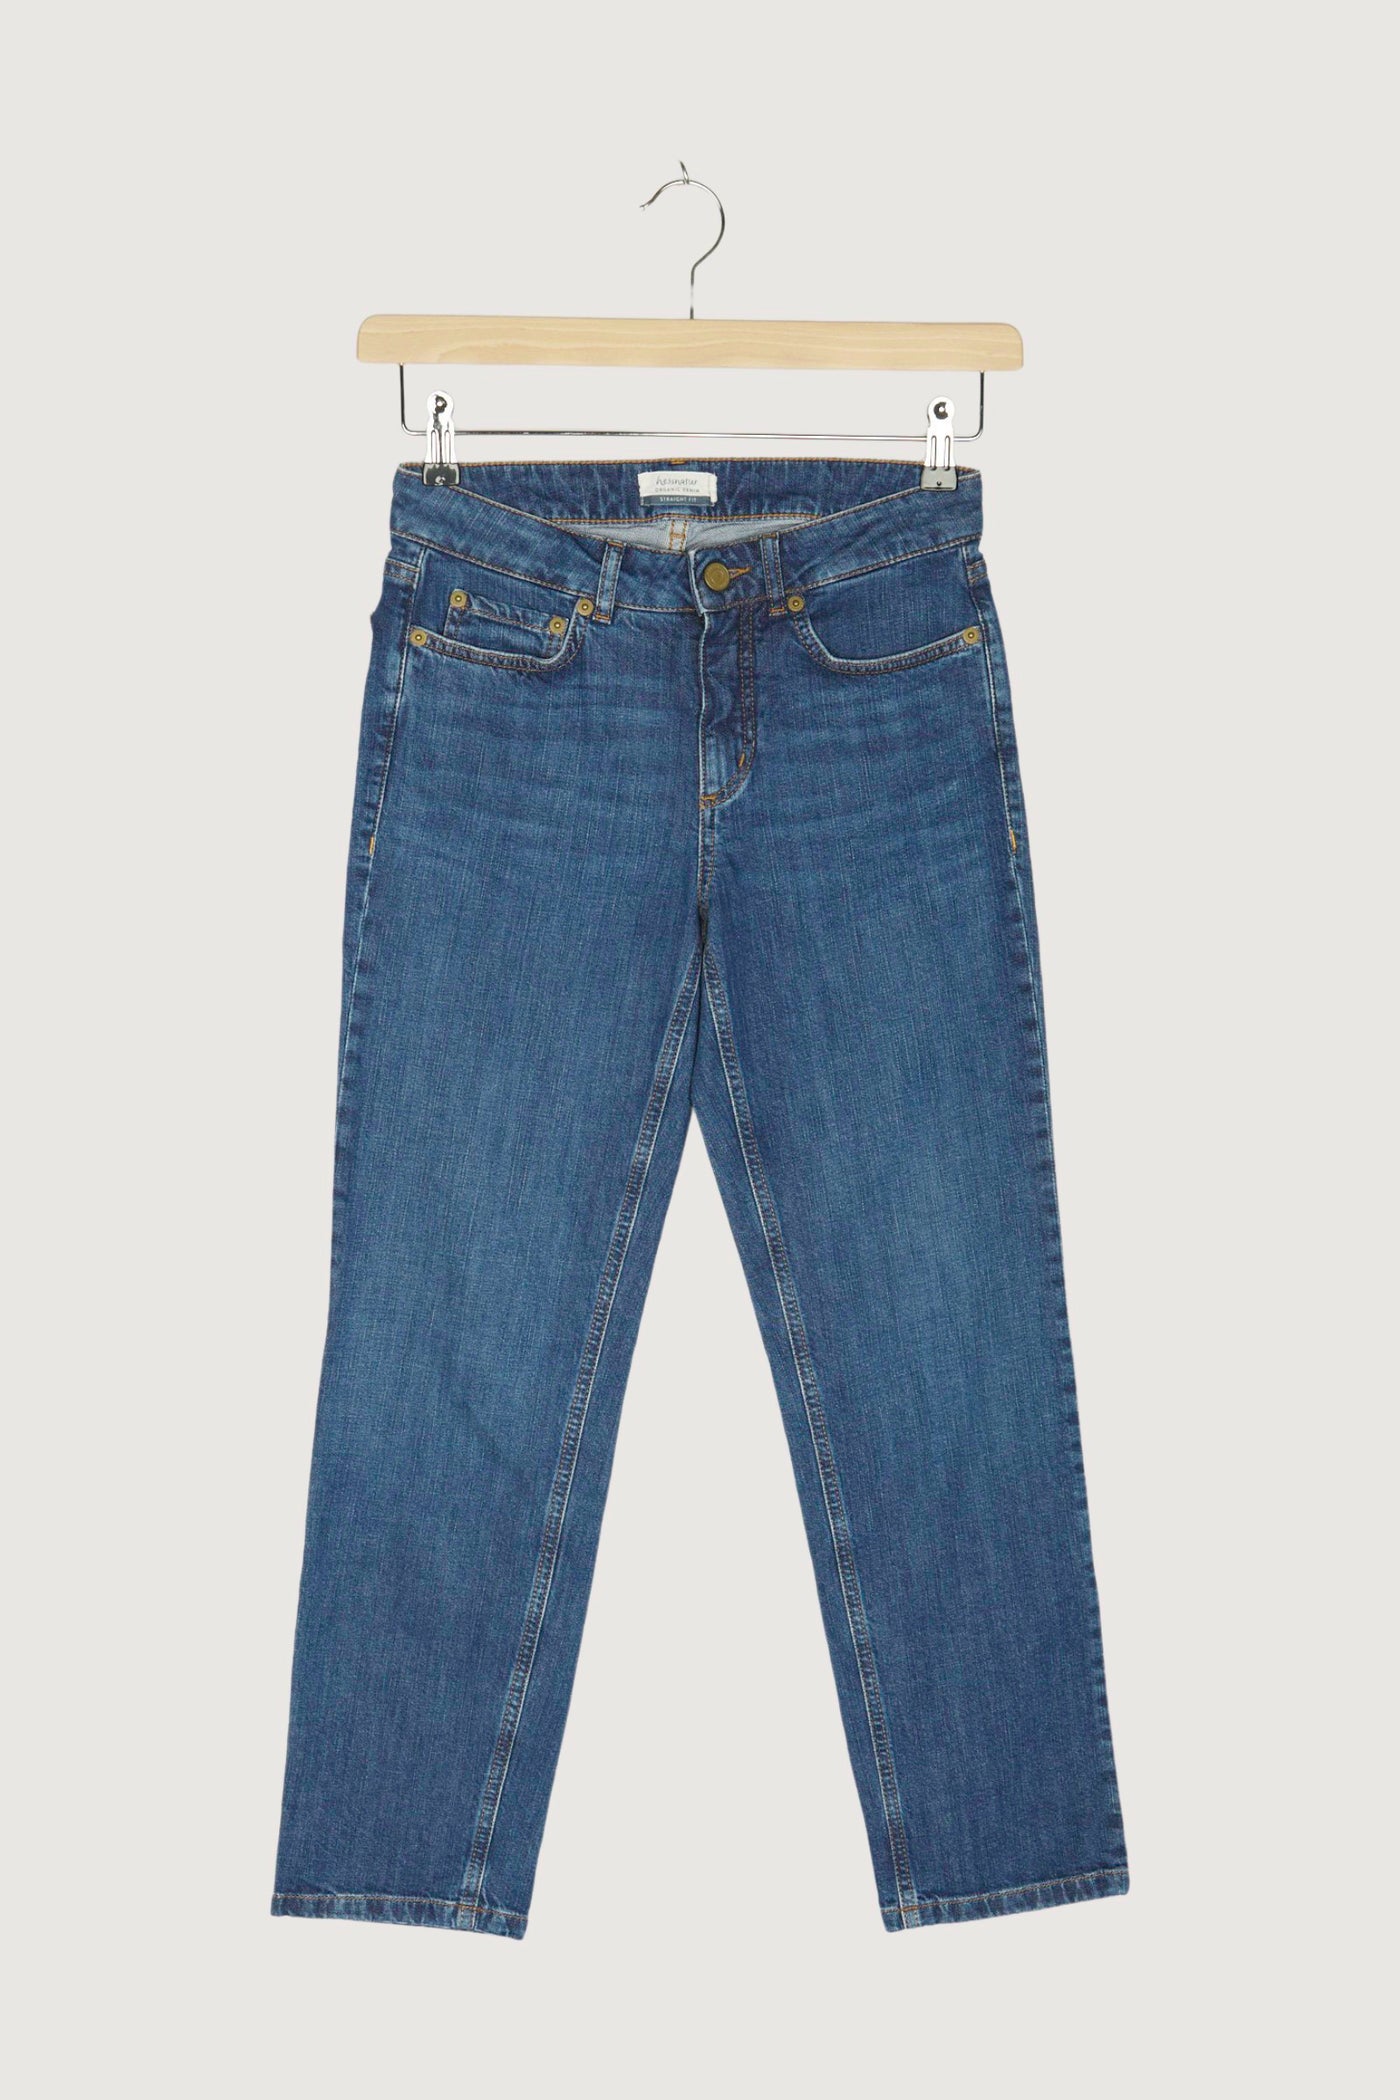 Secondhand Jeans Straight Fit Cropped